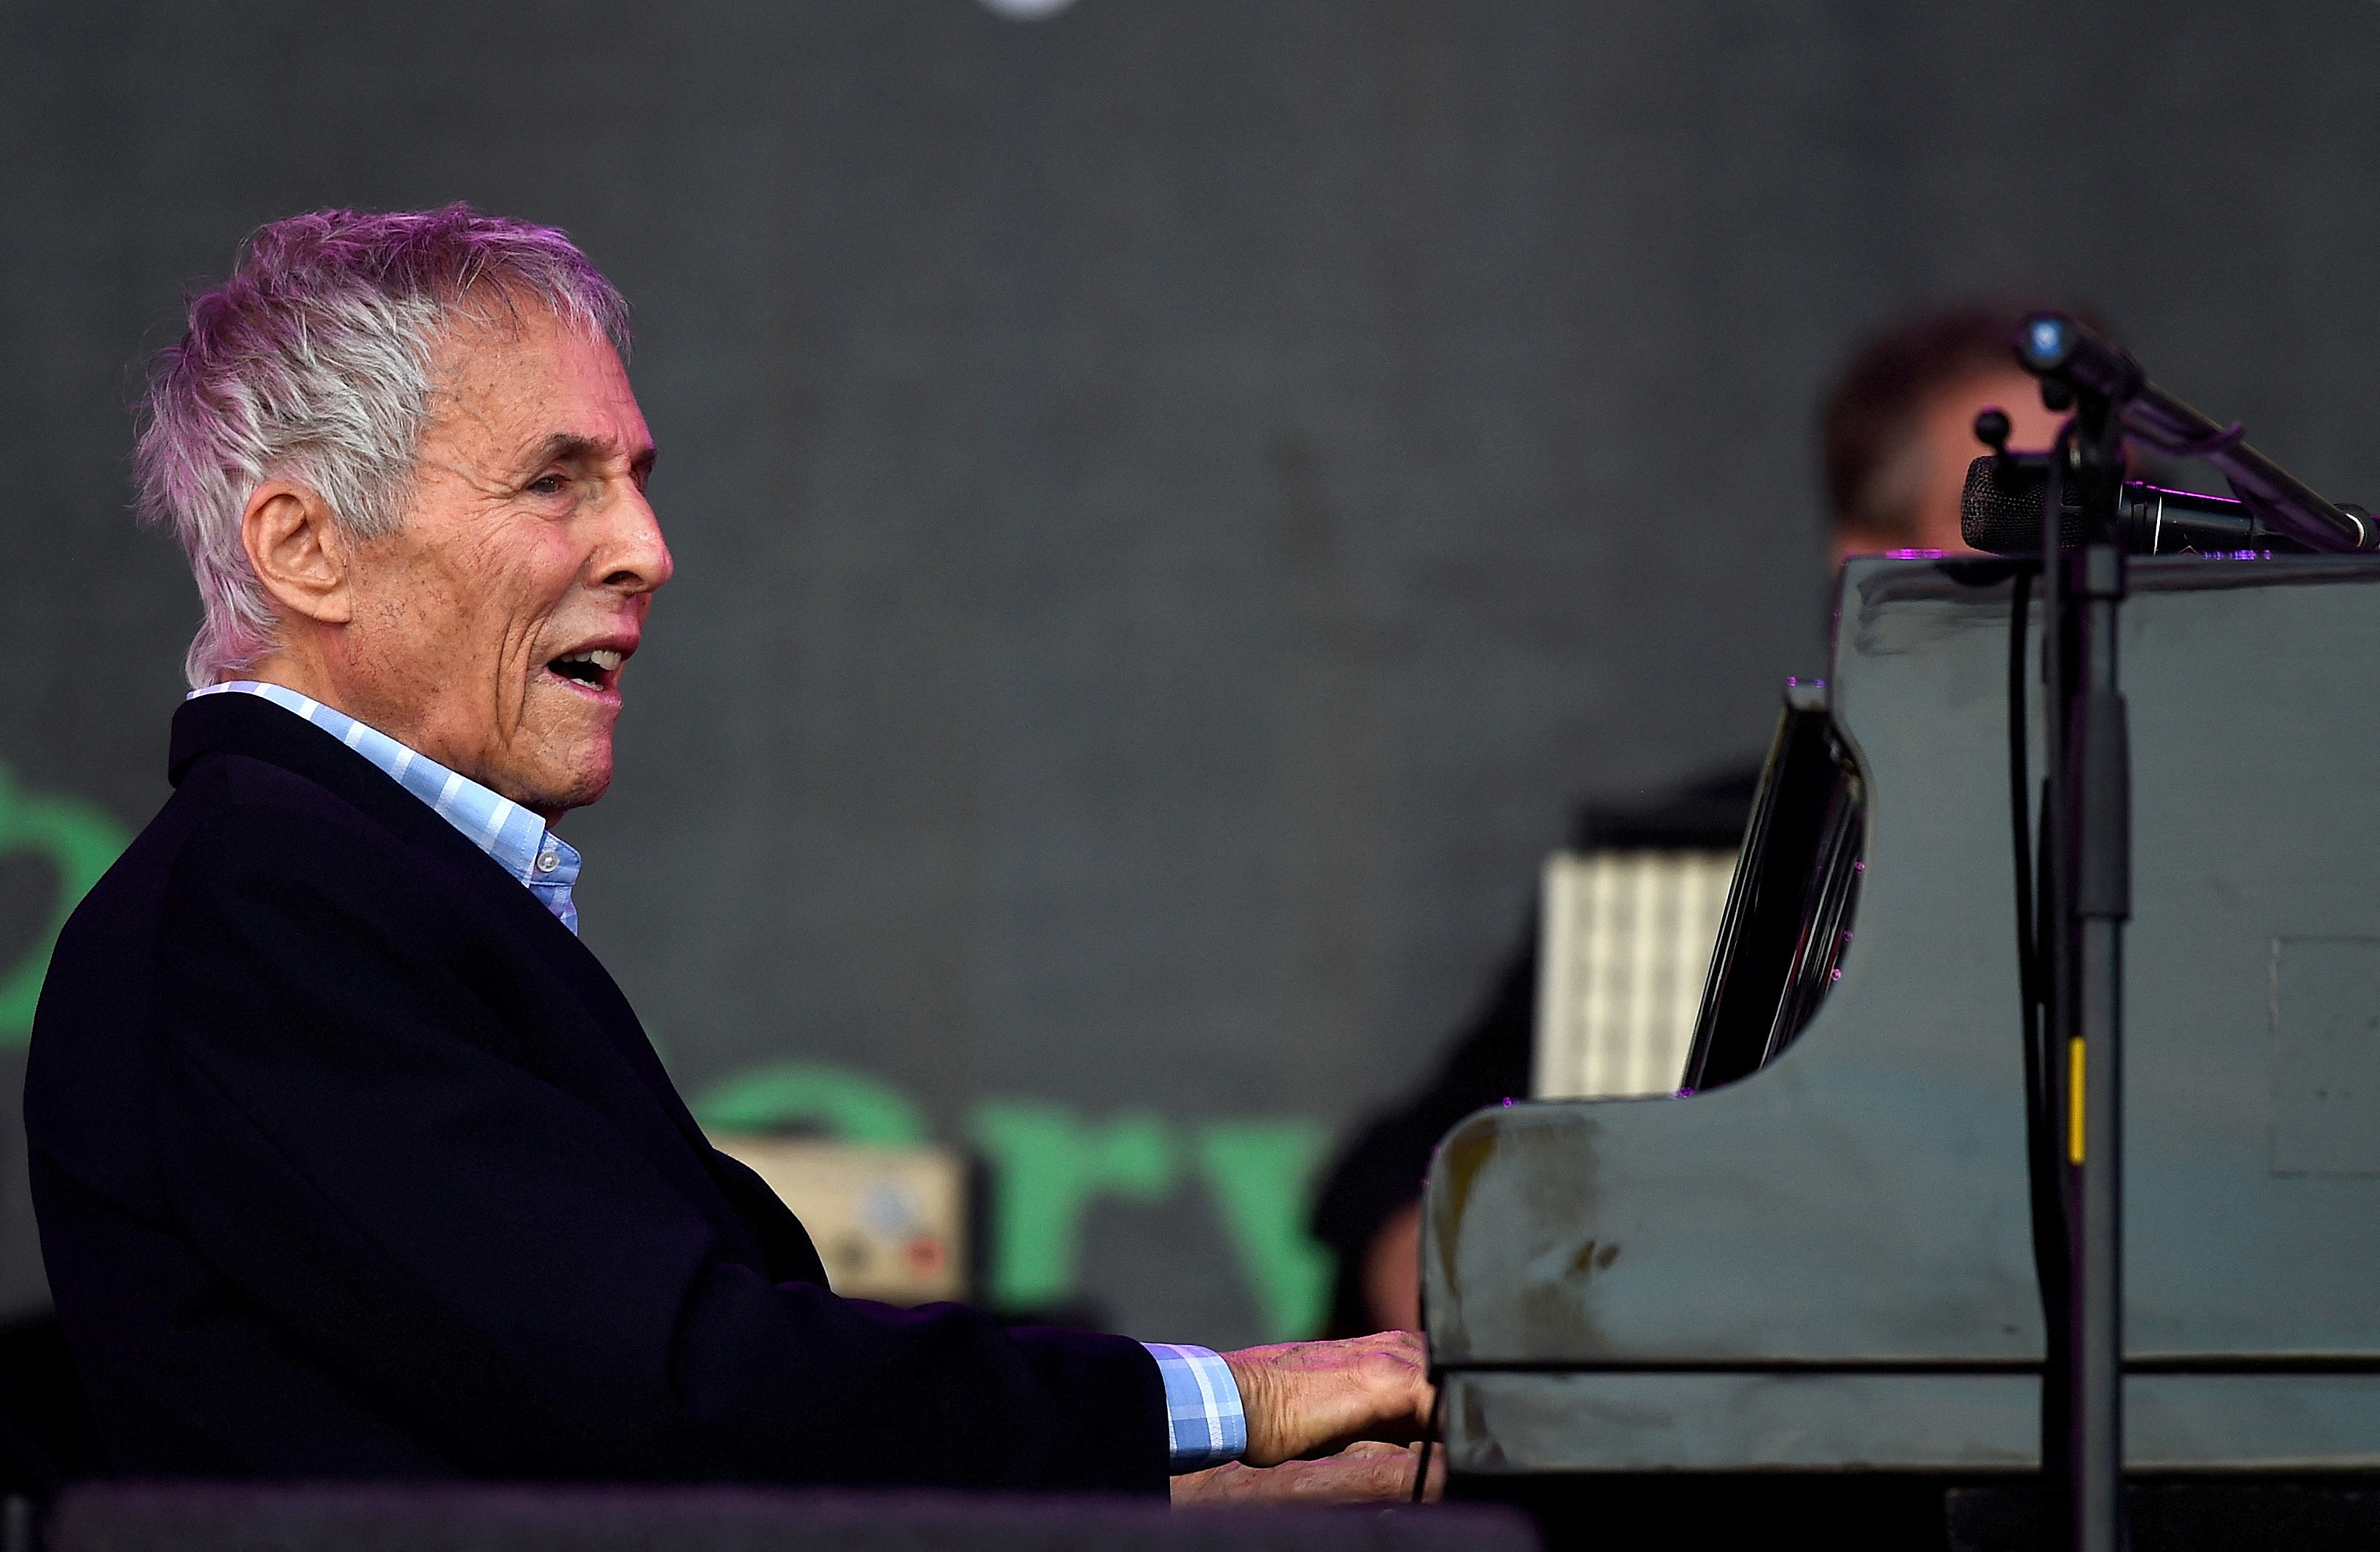 Burt Bacharach performs on the Pyramid stage at Worthy Farm in Somerset during the Glastonbury Festival